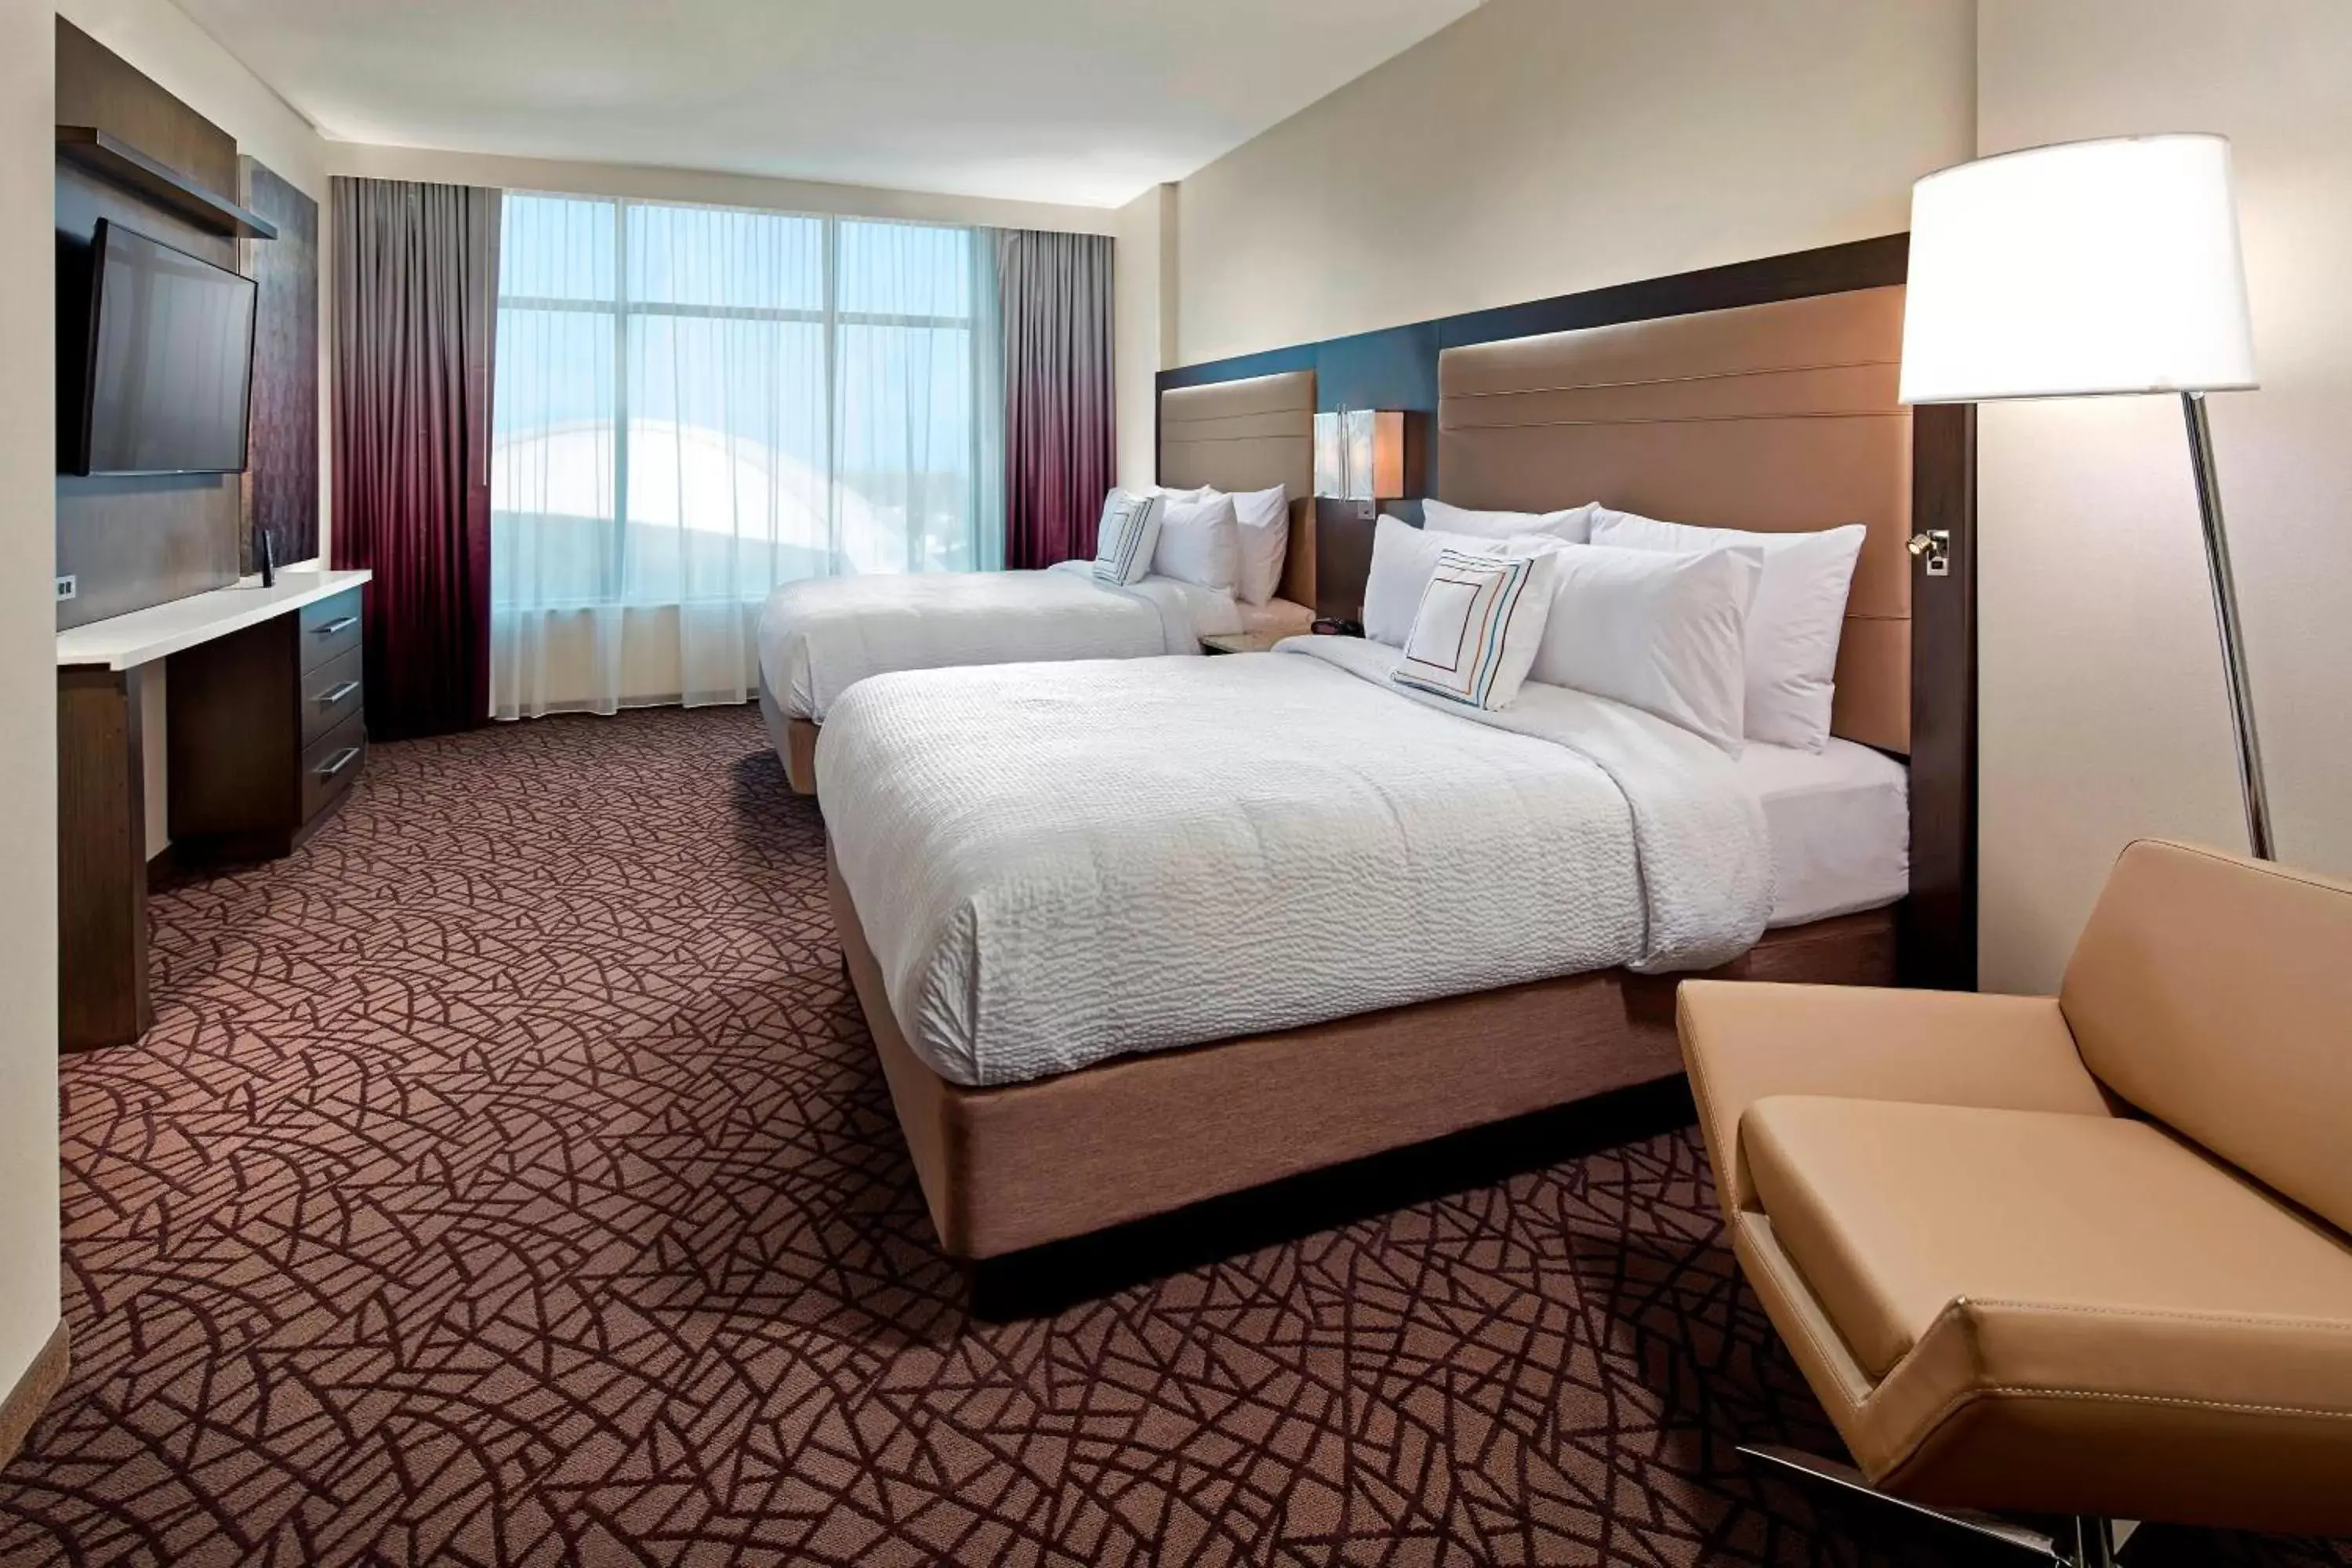 Bedroom in Residence Inn by Marriott at Anaheim Resort/Convention Center